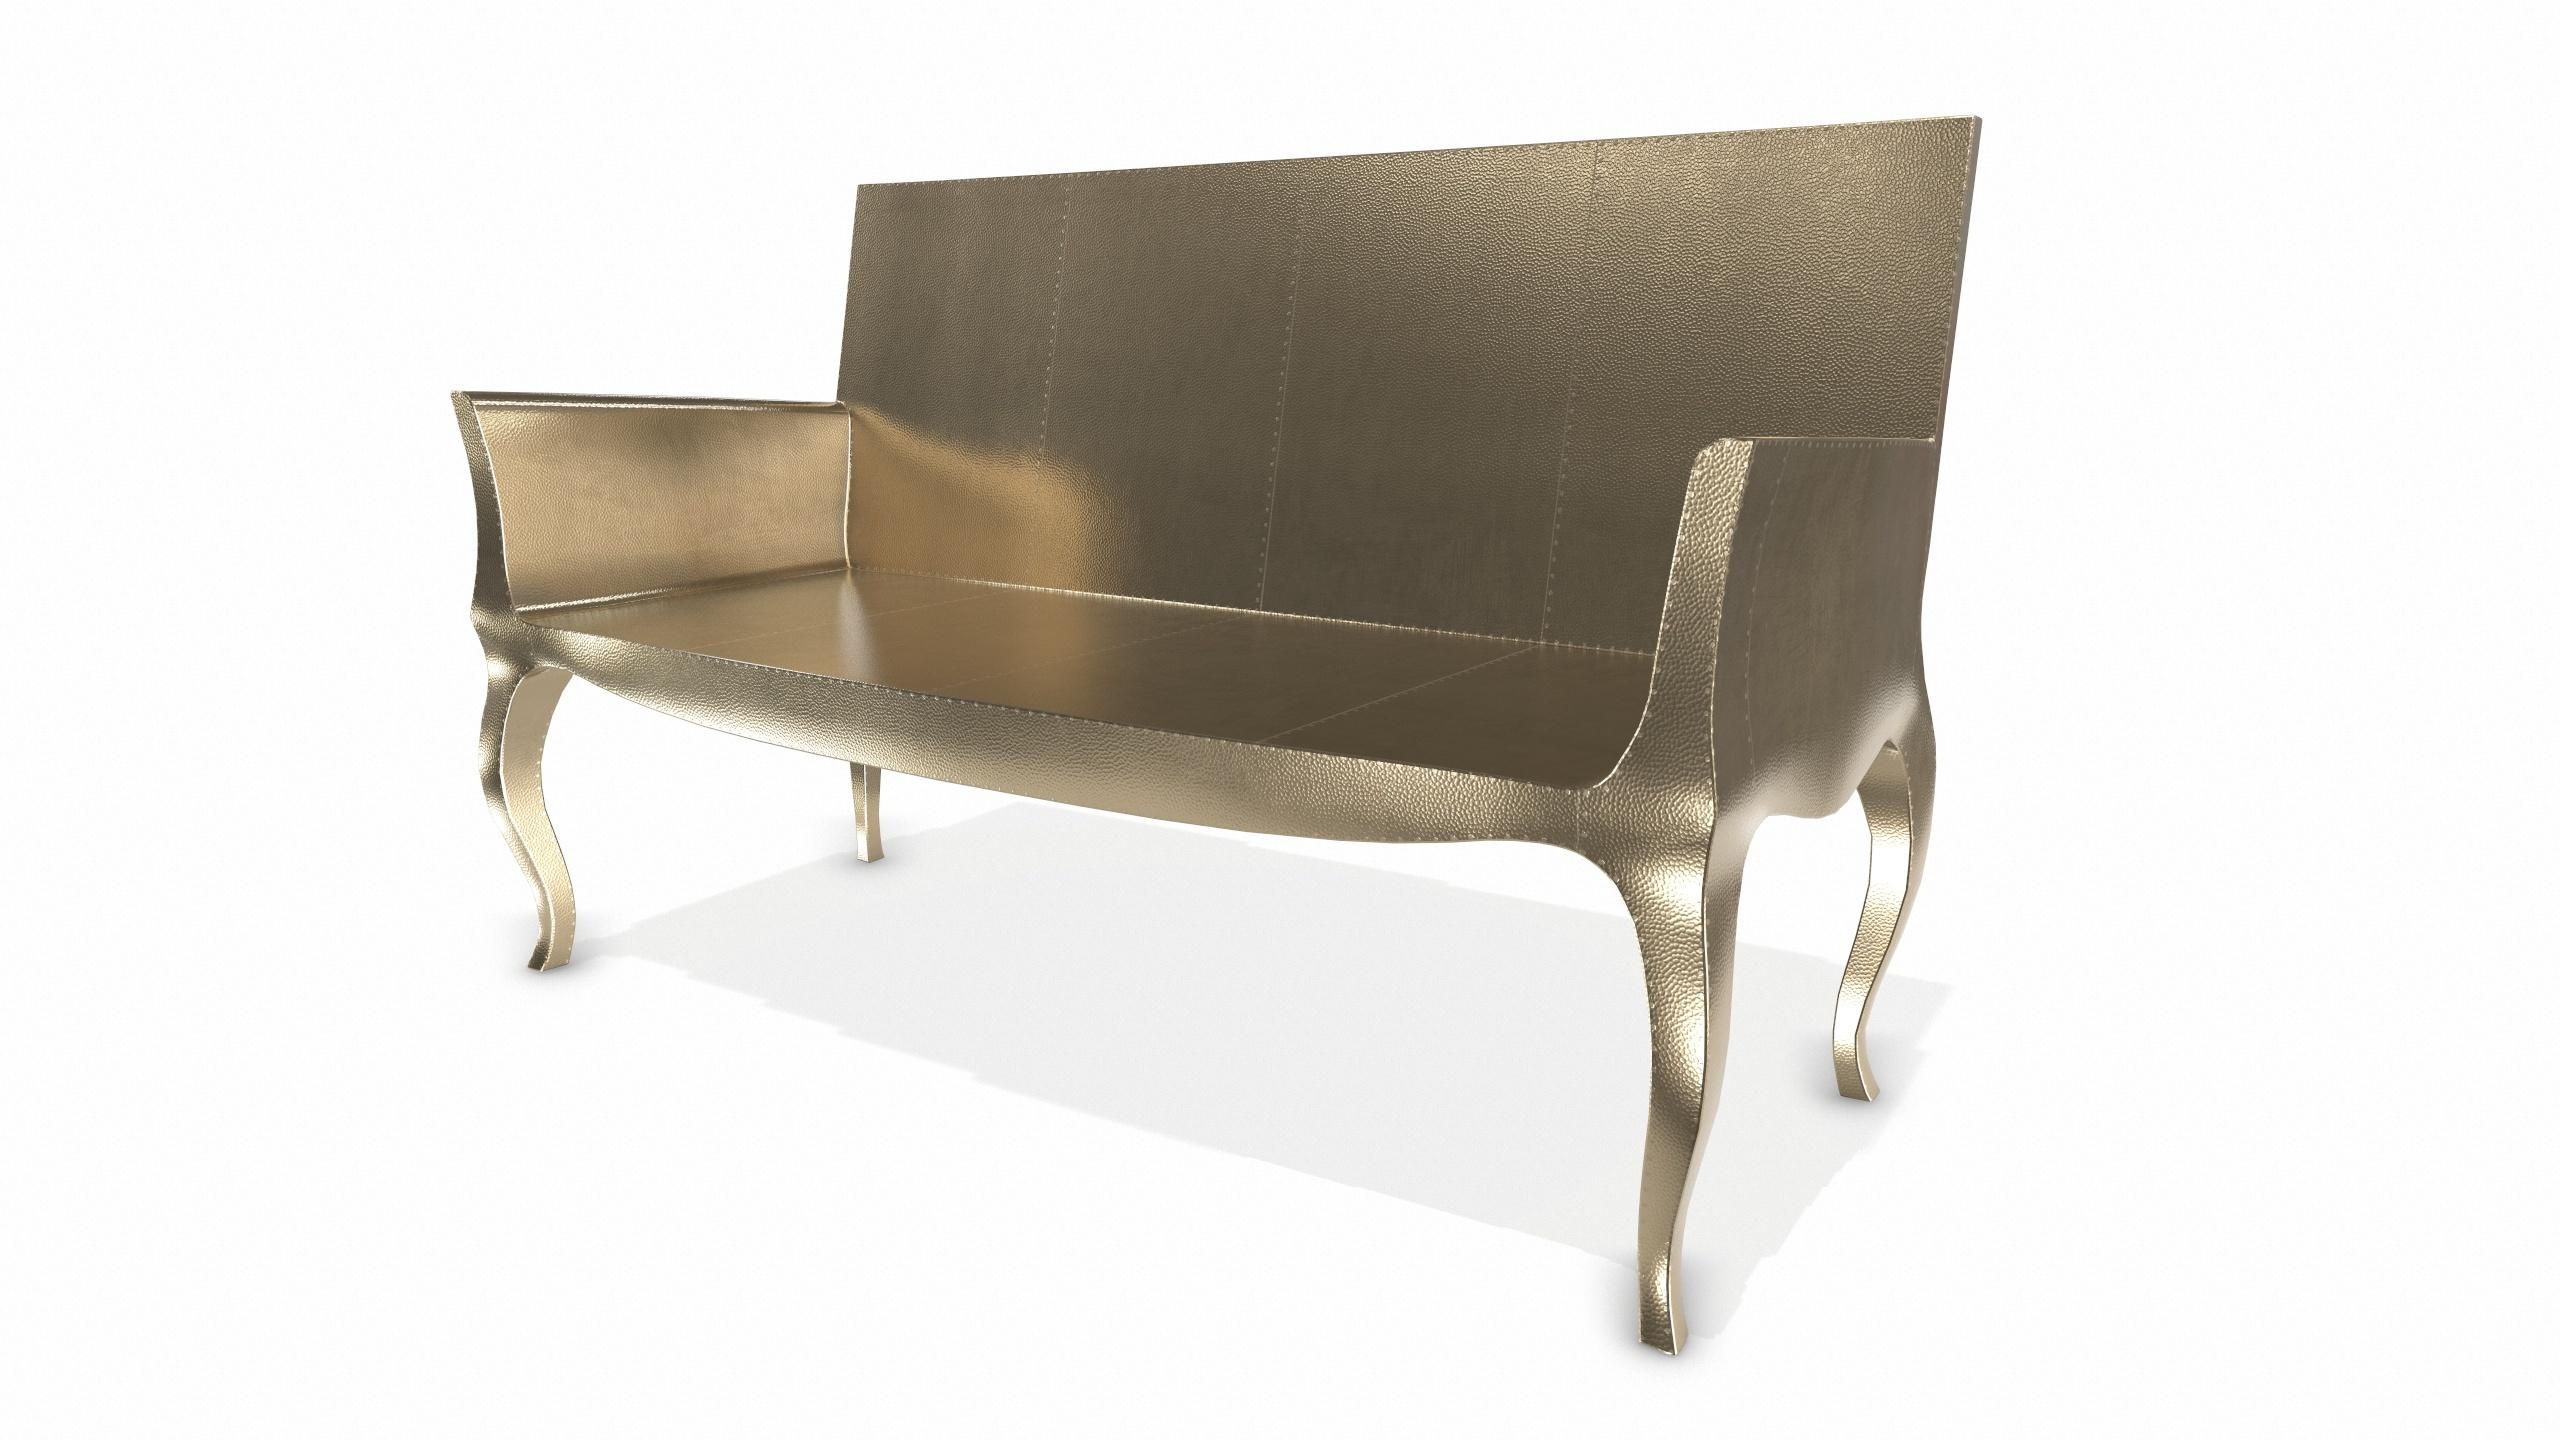 American Louise Settee Art Deco Daybeds in Mid. Hammered Brass by Paul Mathieu For Sale